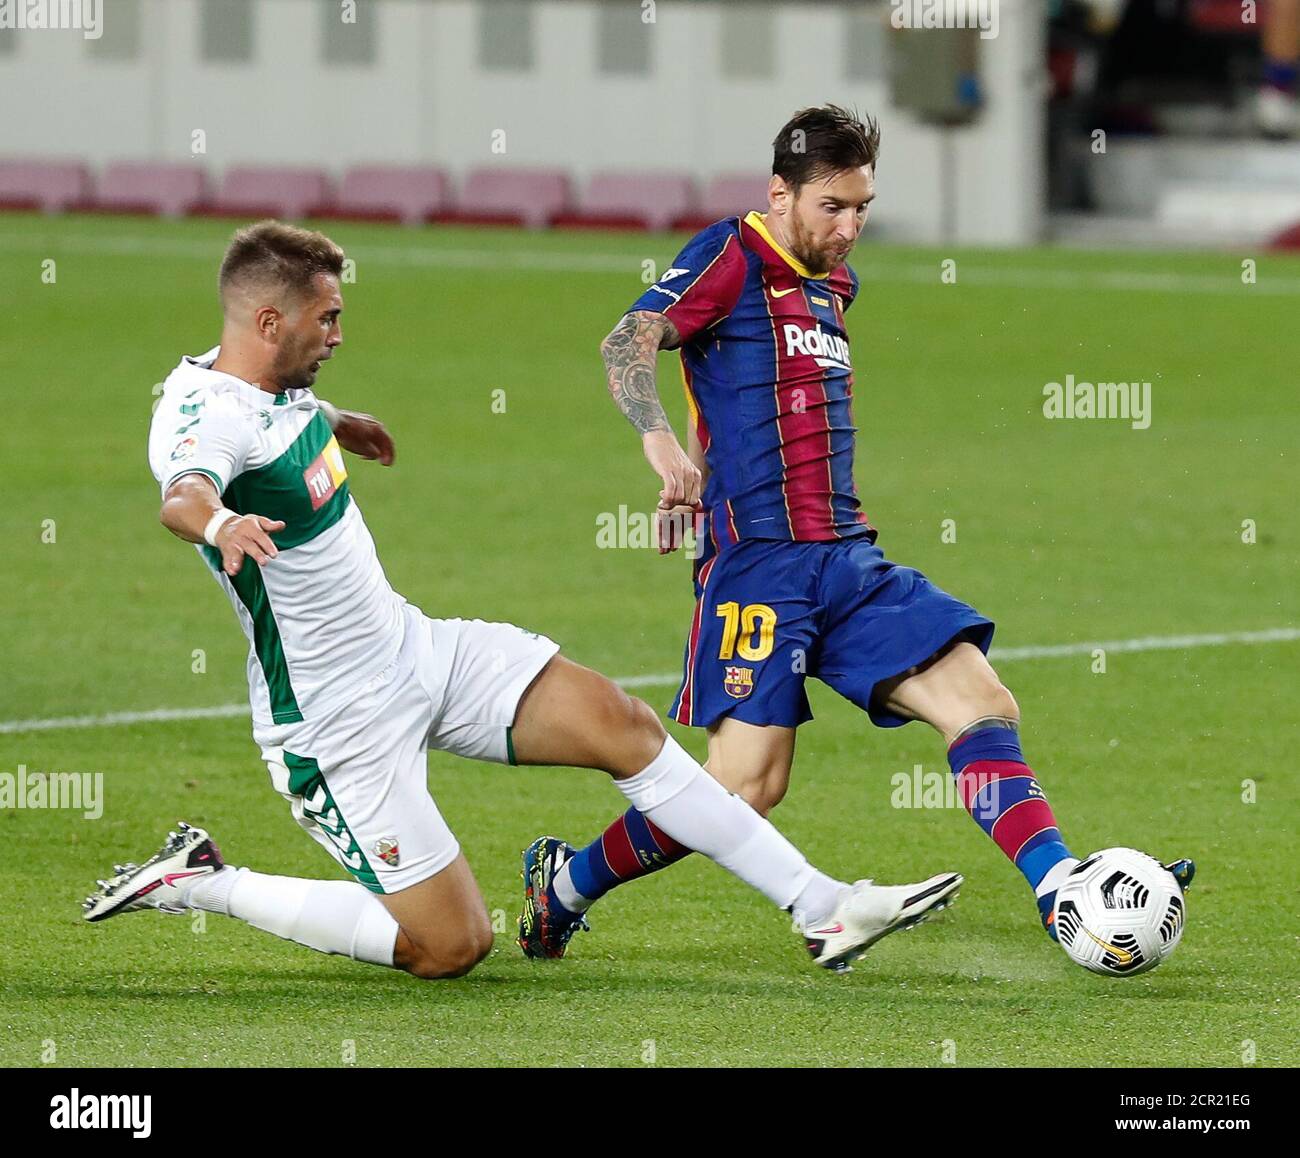 Barcelona, Barcelona, Spain. 19th Sep, 2020. Messi of FC Barcelona in action during the Gamper Trophy match between FC Barcelona and Elche at Camp Nou on September 19, 2020 in Barcelona, Spain. Credit: David Ramirez/DAX/ZUMA Wire/Alamy Live News Stock Photo